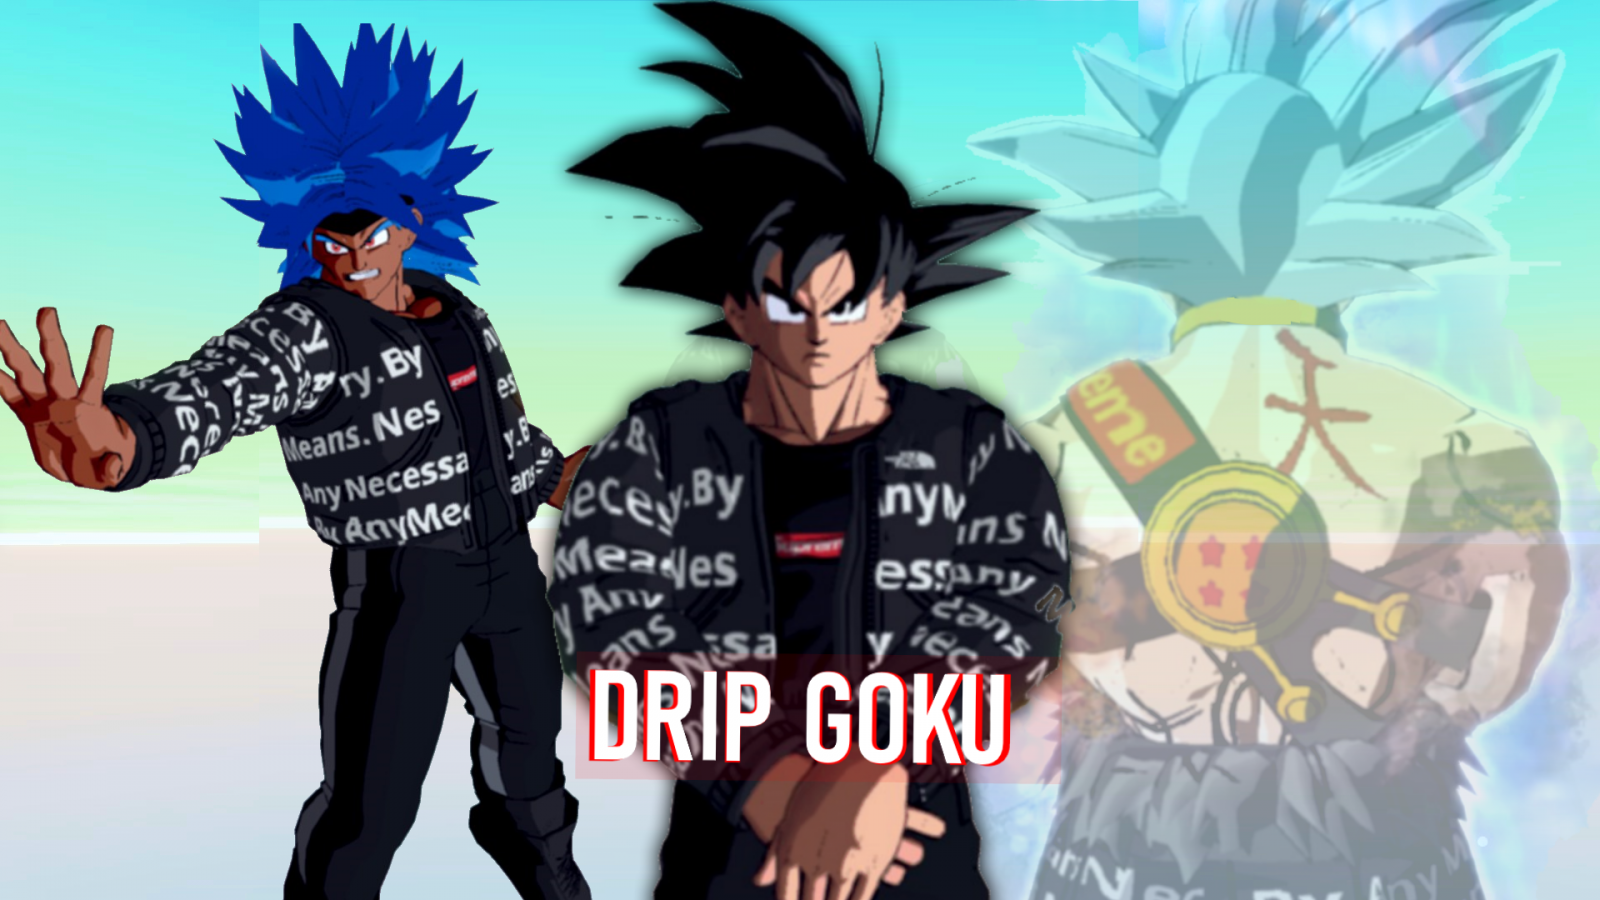 Drip Goku Hum Sym Fit Xenoverse Mods Join my group for more clothing like this! drip goku hum sym fit xenoverse mods